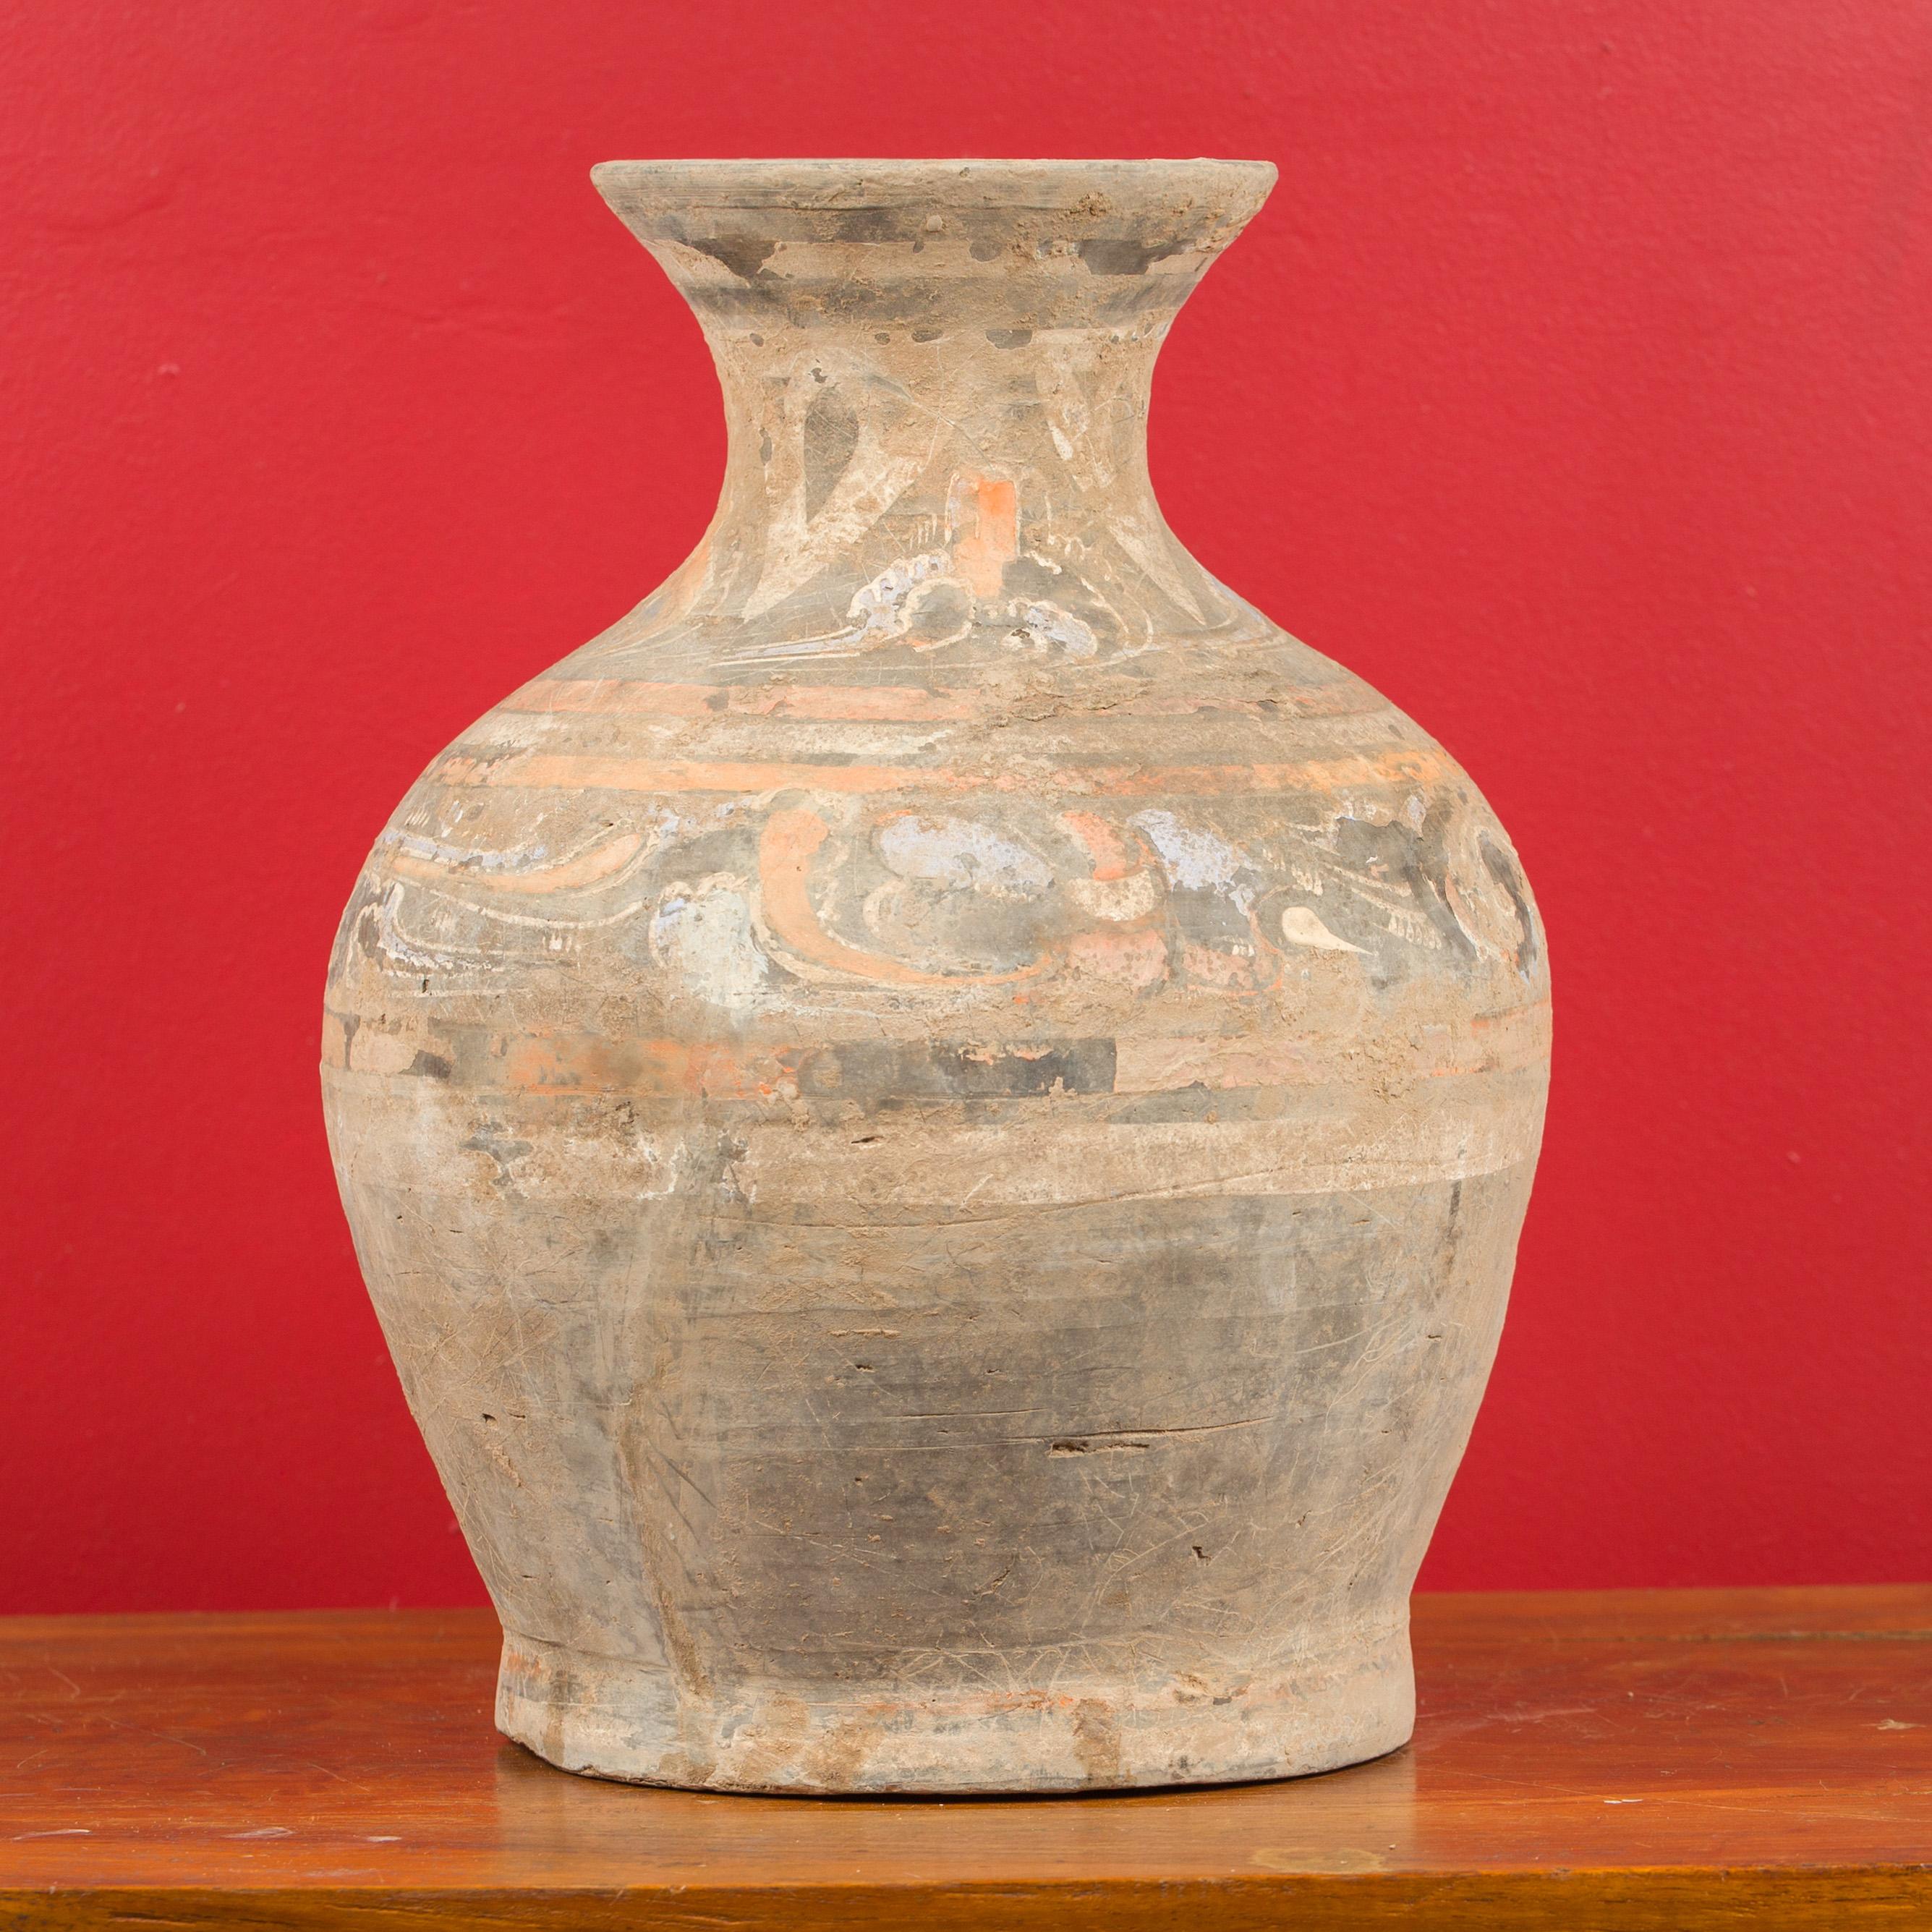 A Chinese Han dynasty terracotta Hu vessel circa 202 BC-200 AD, with original hand painted decor. Created in China during the Han dynasty, this terracotta wine vessel, called a Hu vessel, features a nicely swelling body topped with a narrow neck.